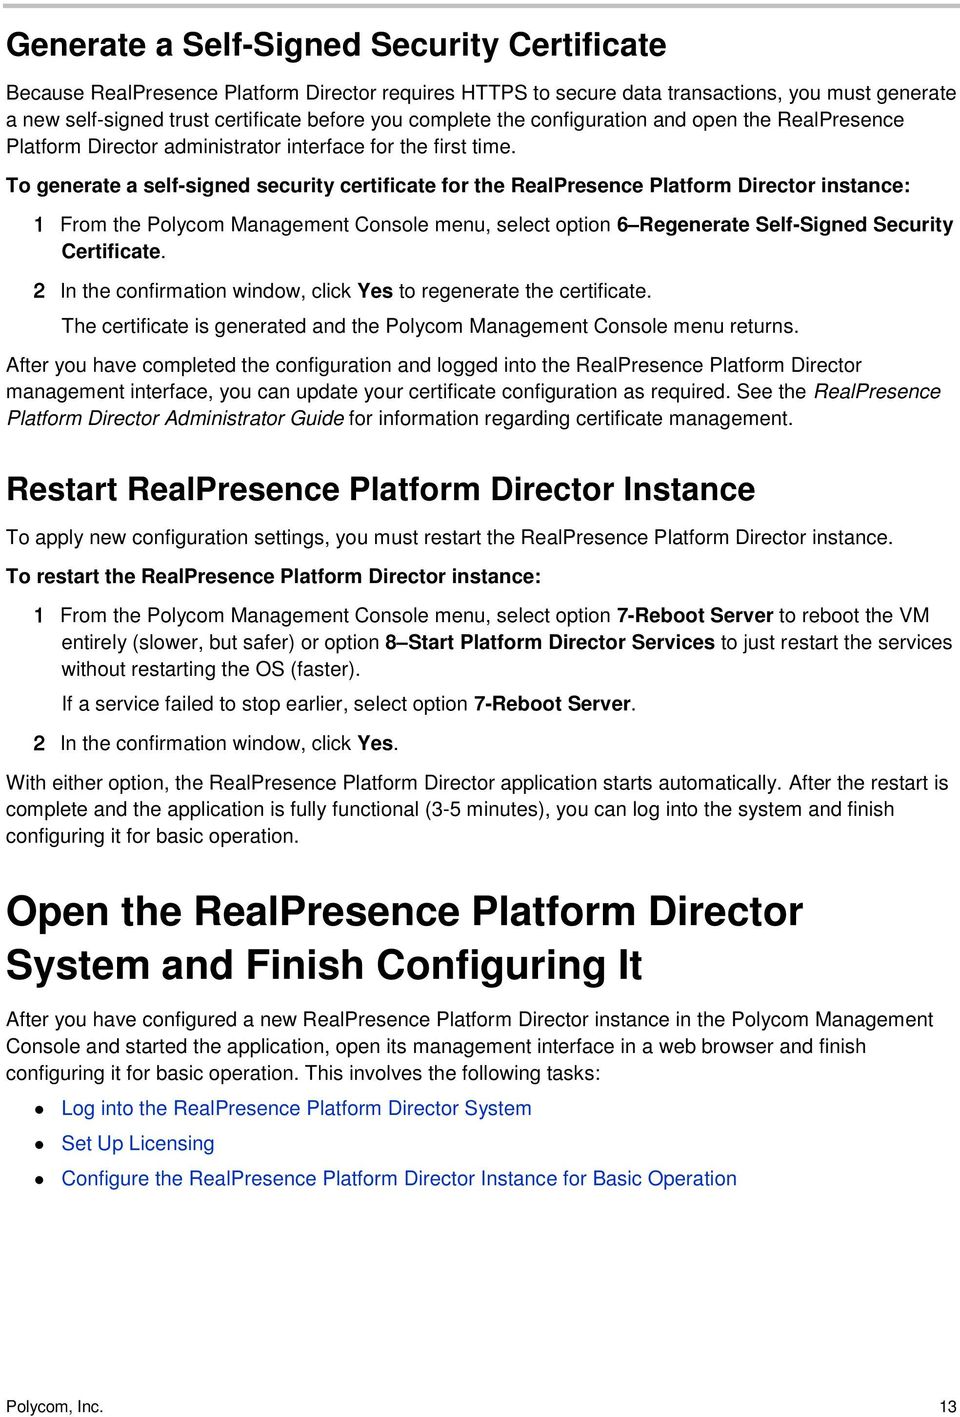 To generate a self-signed security certificate for the RealPresence Platform Director instance: 1 From the Polycom Management Console menu, select option 6 Regenerate Self-Signed Security Certificate.